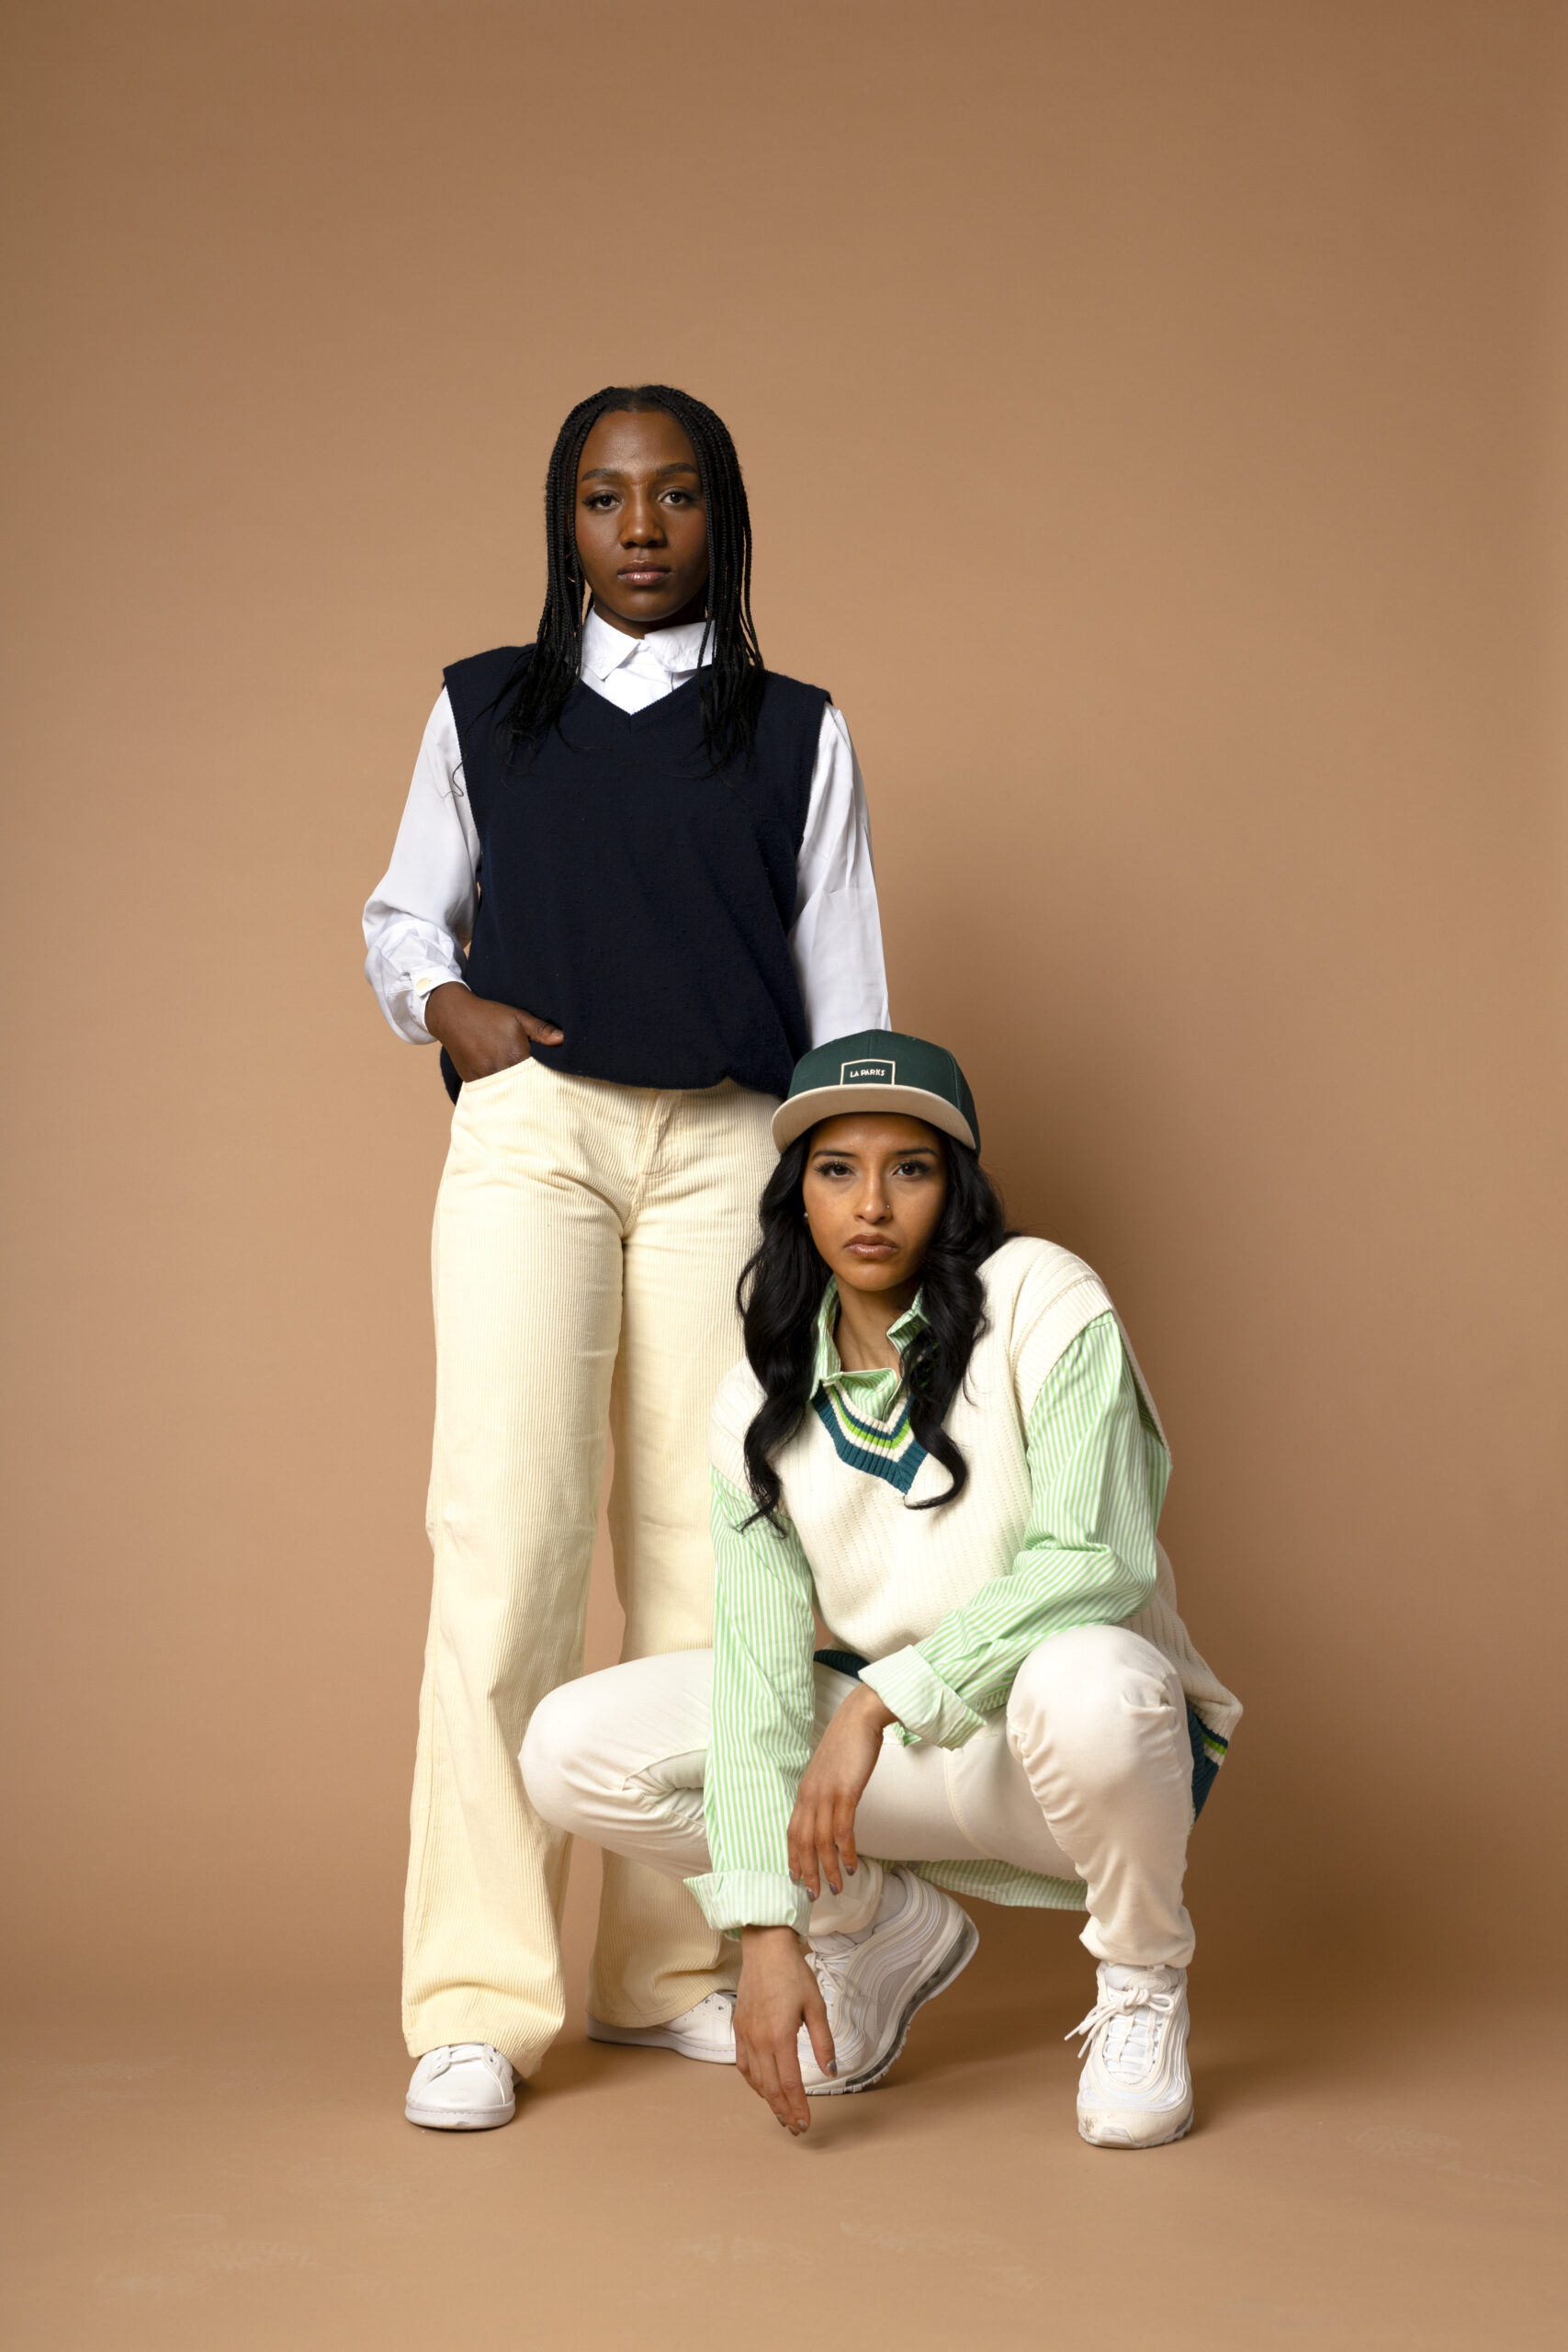 One model standing with one hand on a chair and one model sitting in the chair with their hand resting under their chin while wearing retro sports clothing against a brown backdrop.